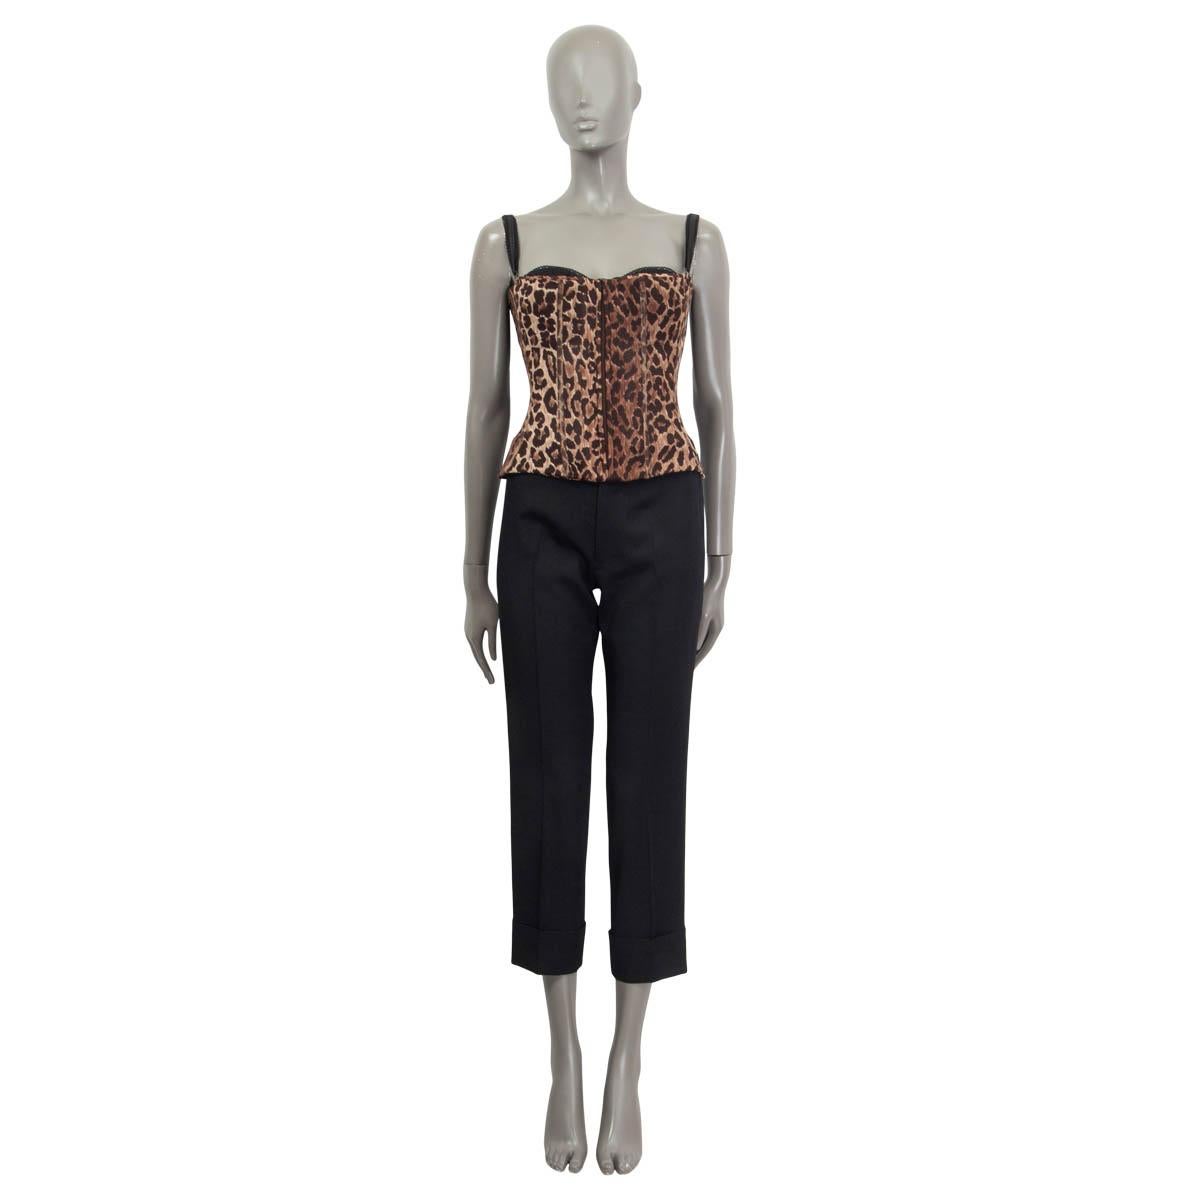 100% authentic Dolce & Gabbana Fall/Winter 1998 leopard printed corsette in brown and black silk (assumed cause tag is missing). Features lace details at the bust and lace straps. Opens with a zipper and a hook at the back. Unlined. Has been worn